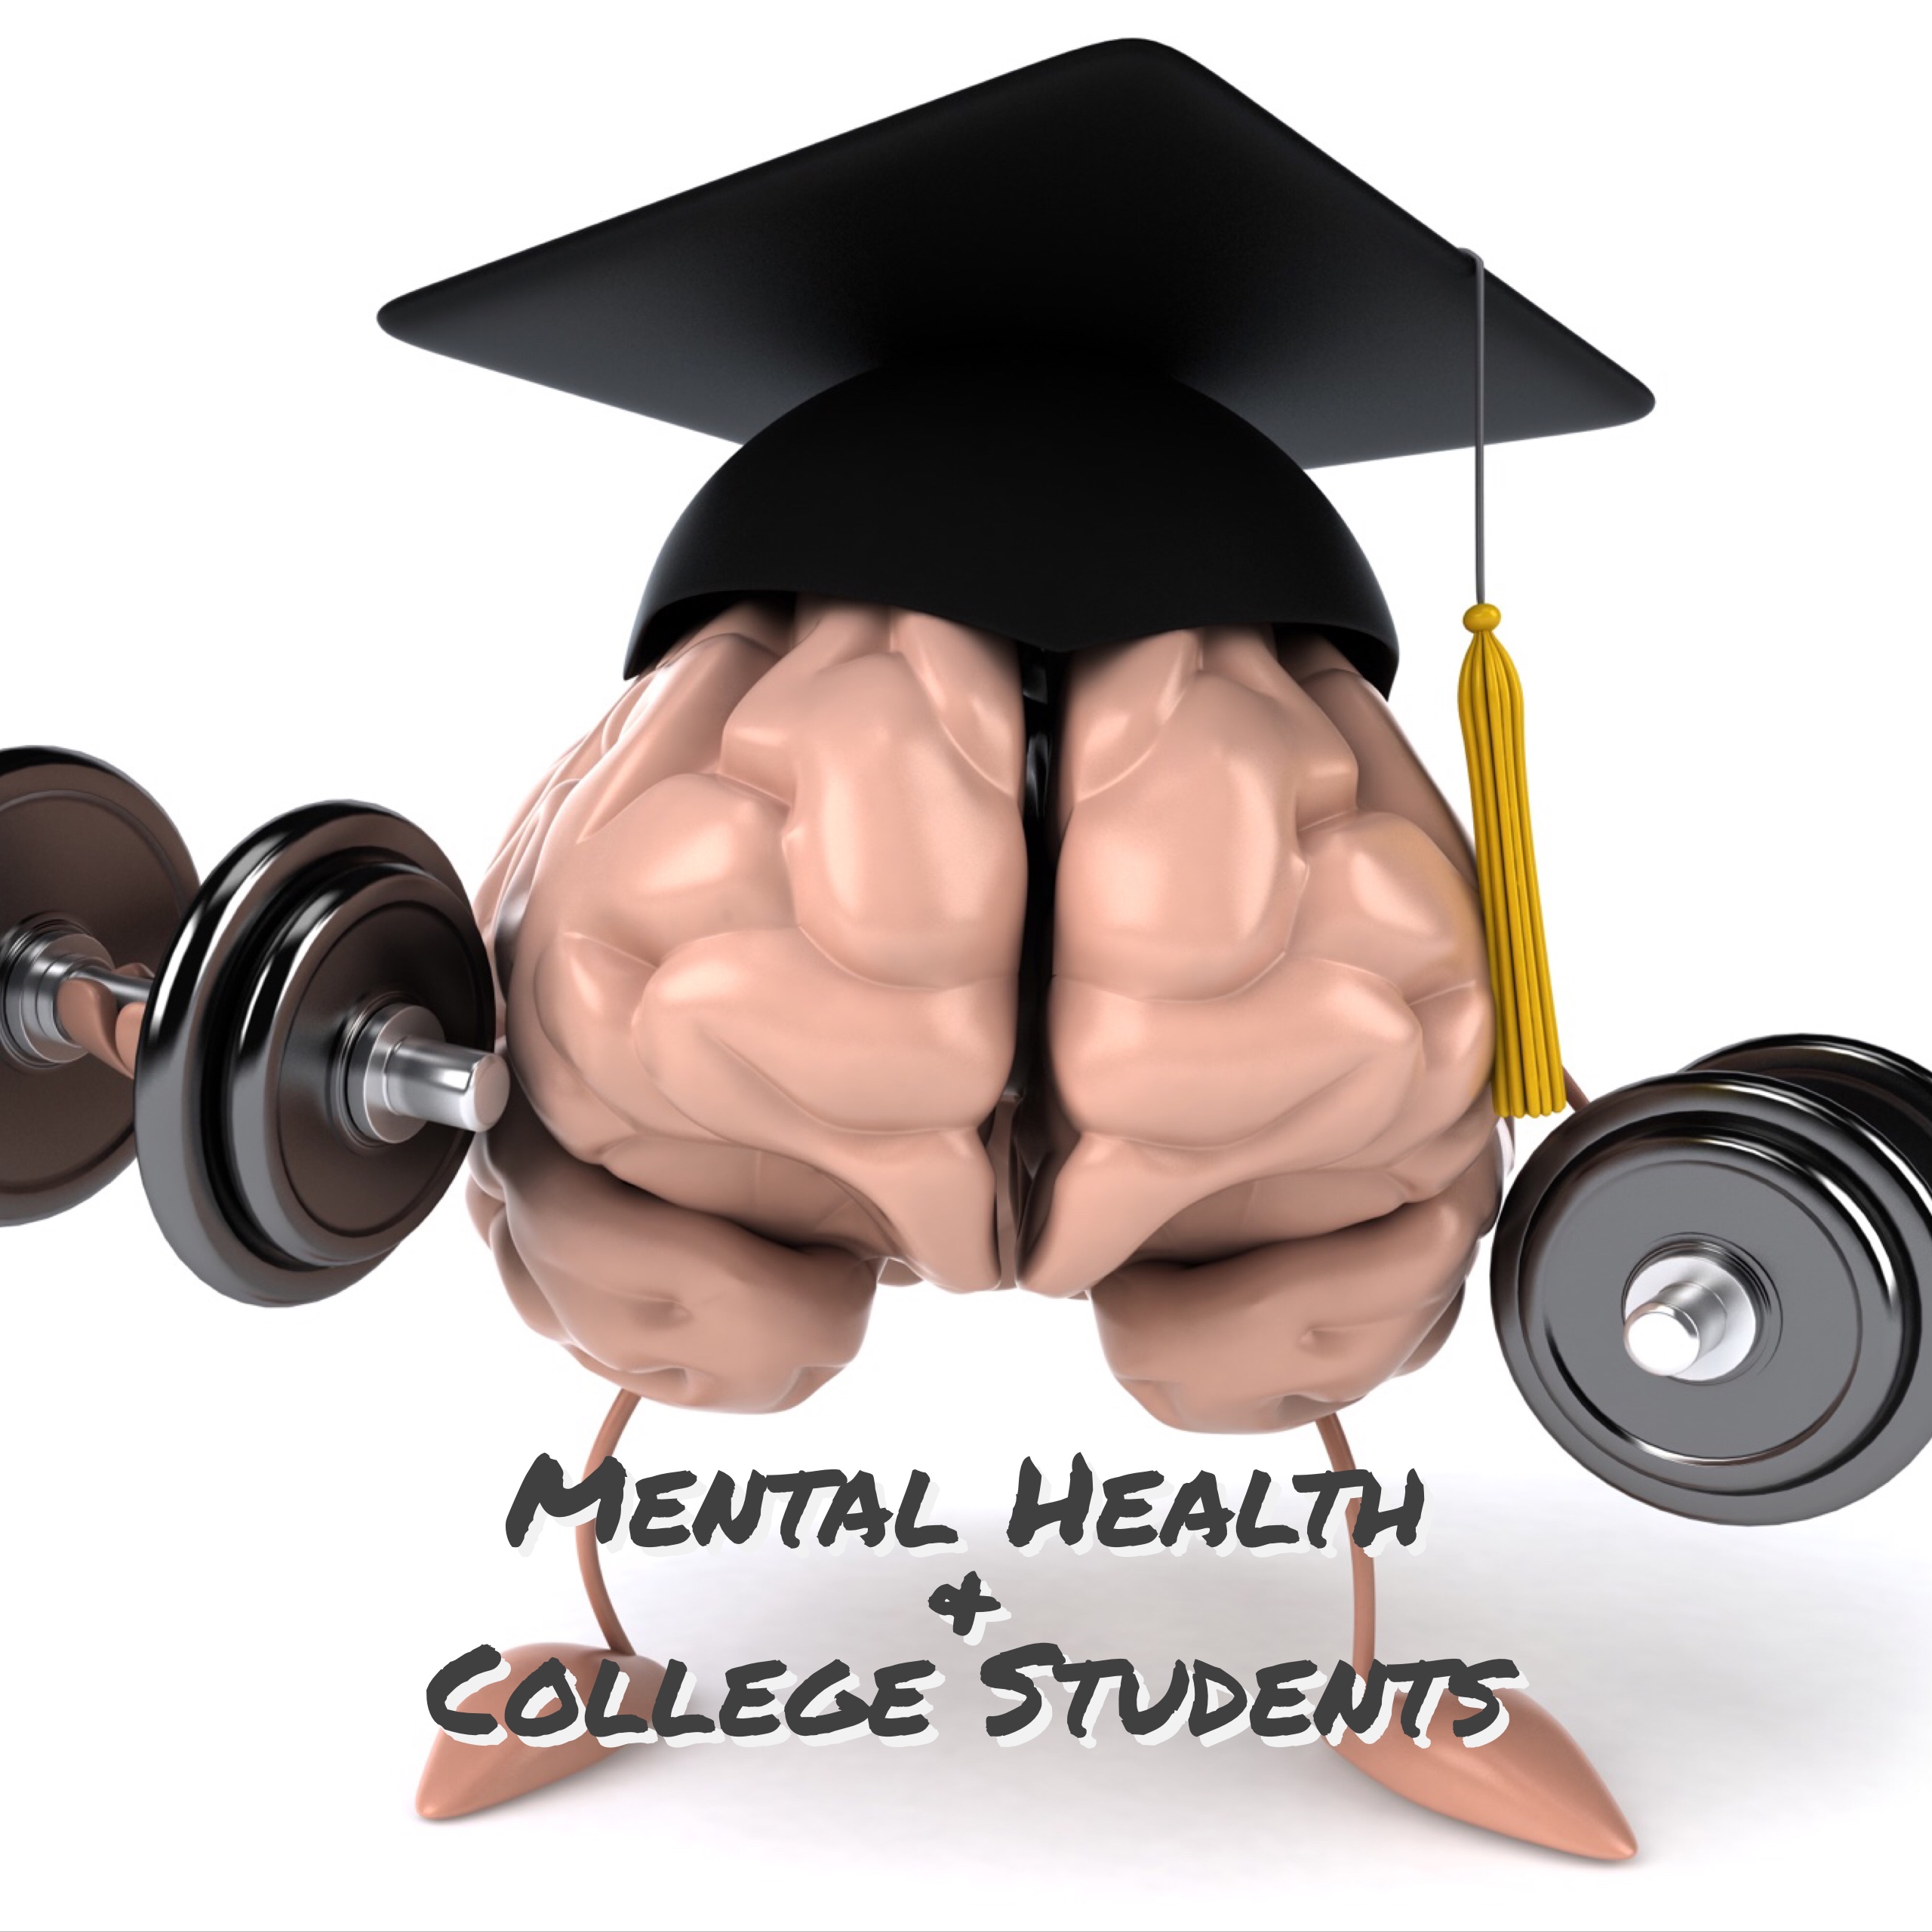 SHI 2012: Mental Health & College Students